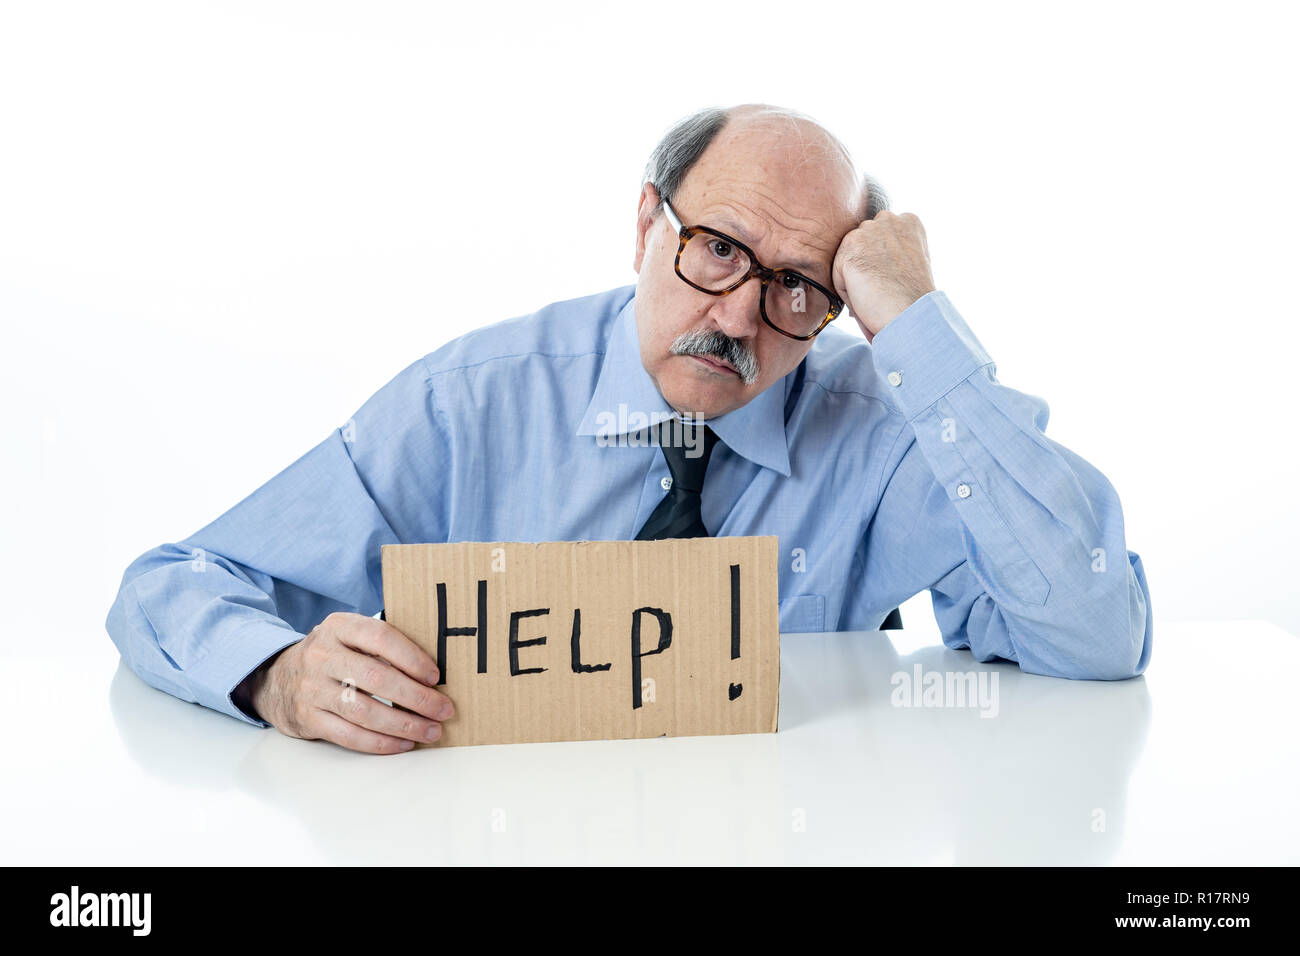 Senior mature business man with bald head on his 60s feeling stressed and frustrated looking tired and overwhelmed holding a help sign in Job problems Stock Photo